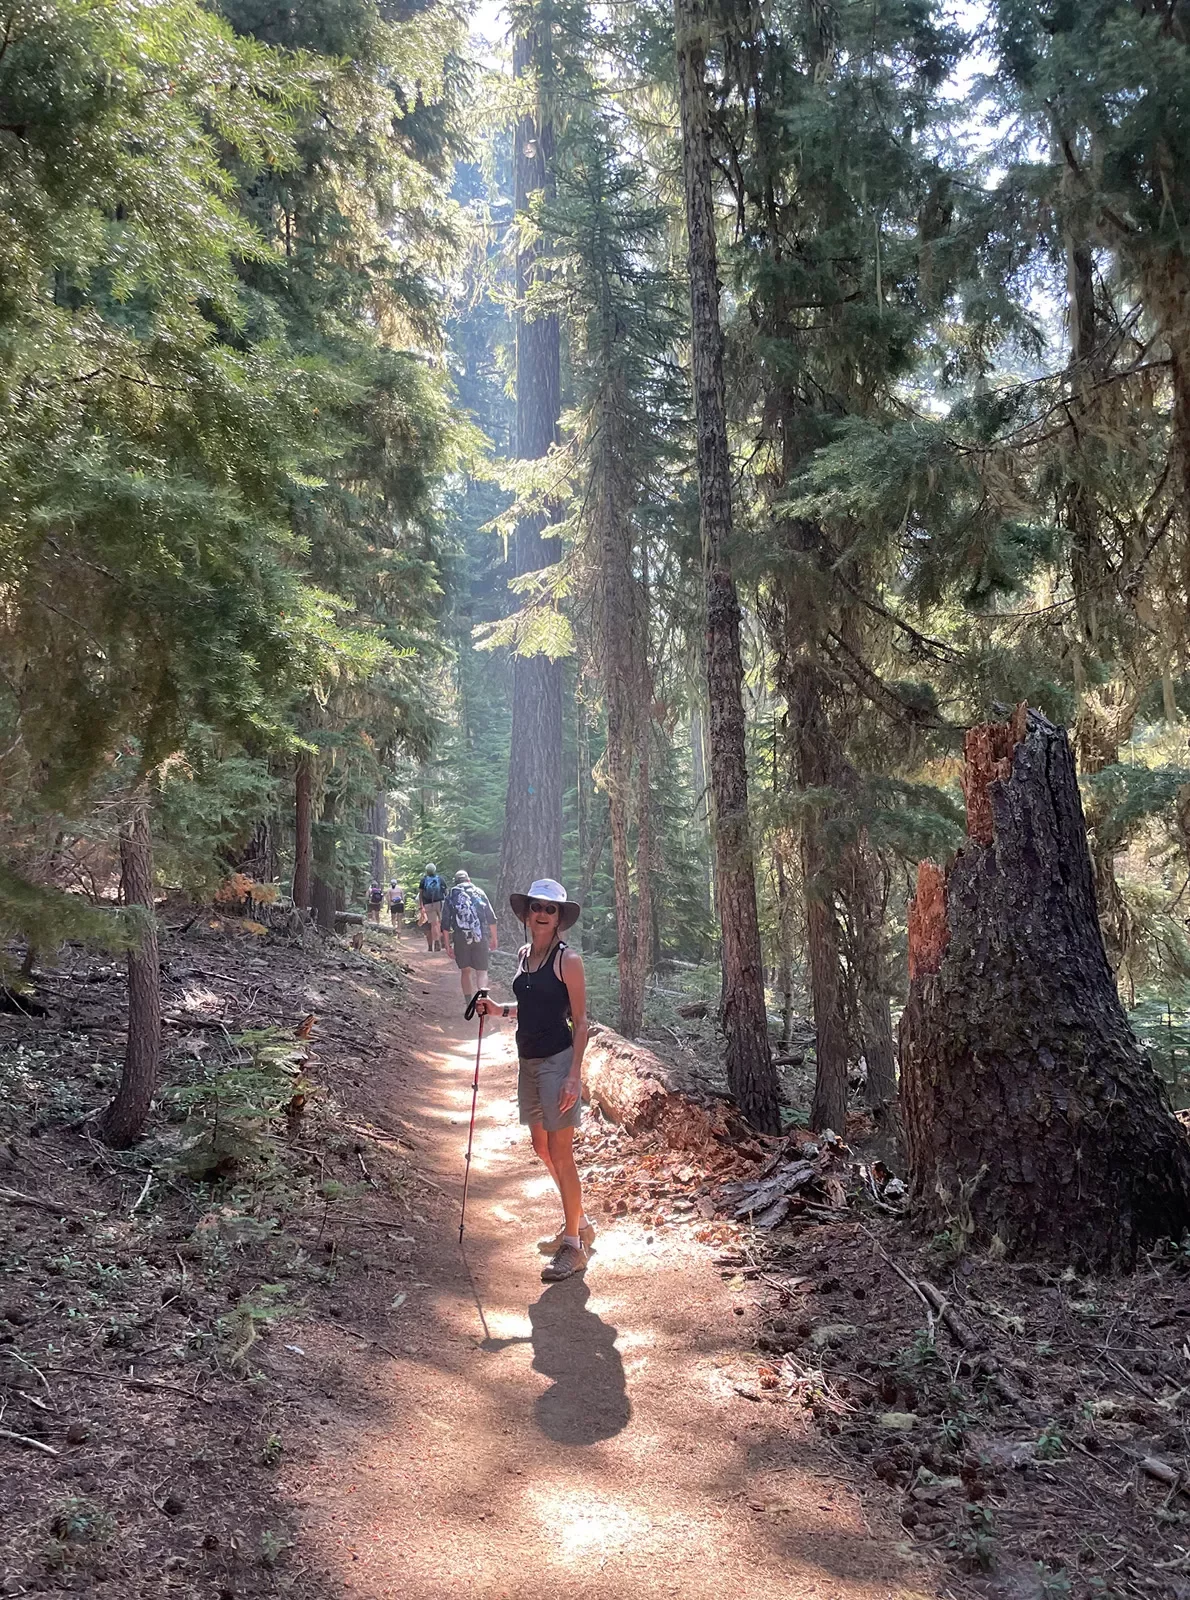 Hikers on a forest path surrounded by conical trees.